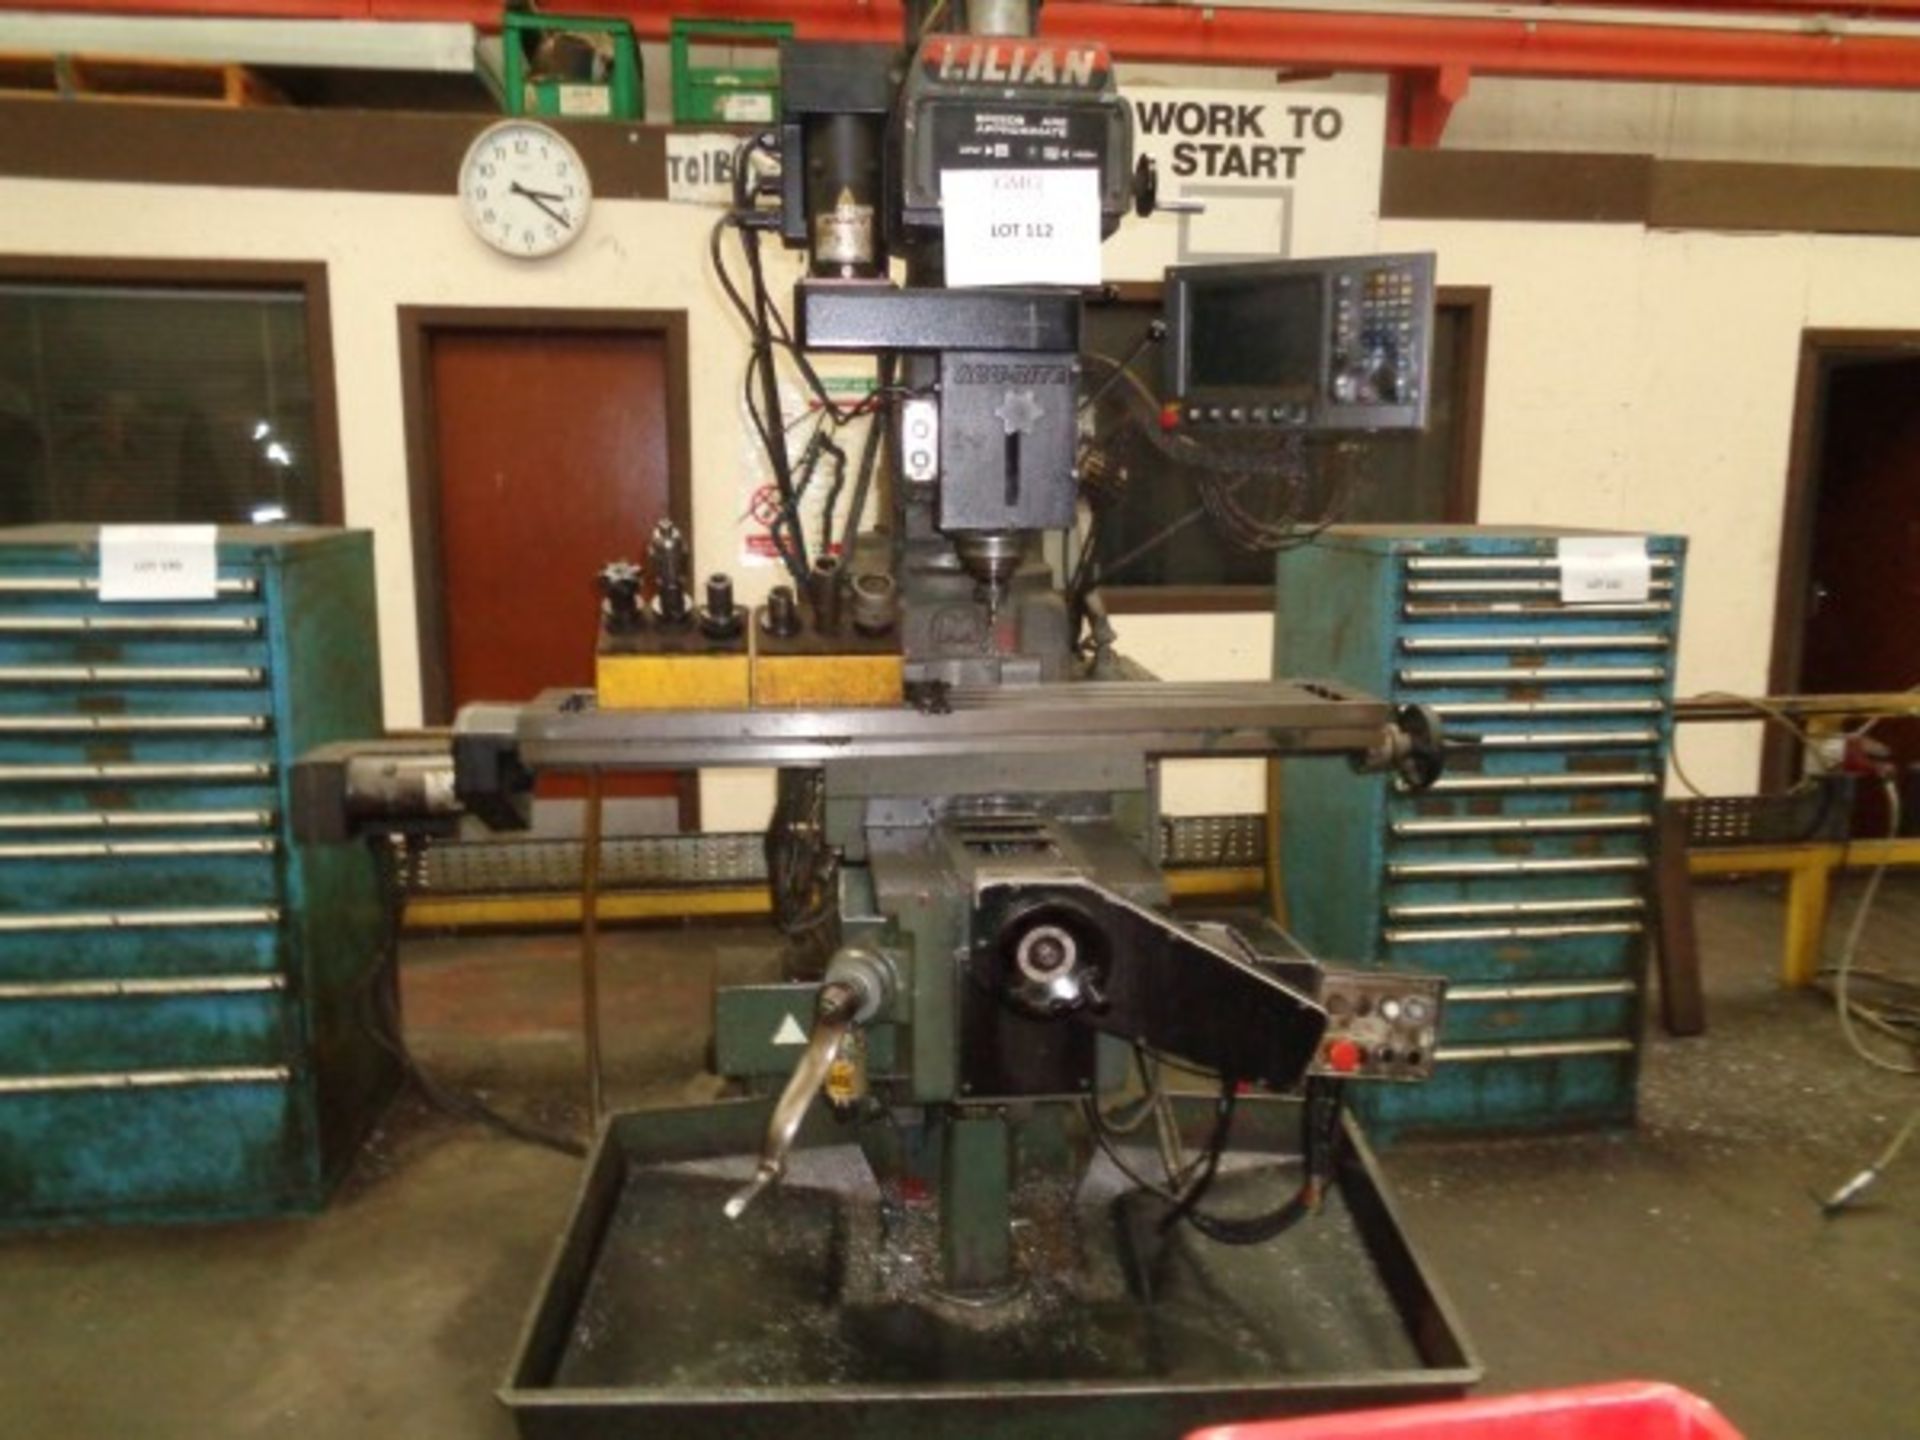 Lilian model 5VH turret mill with Acu-Rite control, Serial No. 10185, Year. 2000